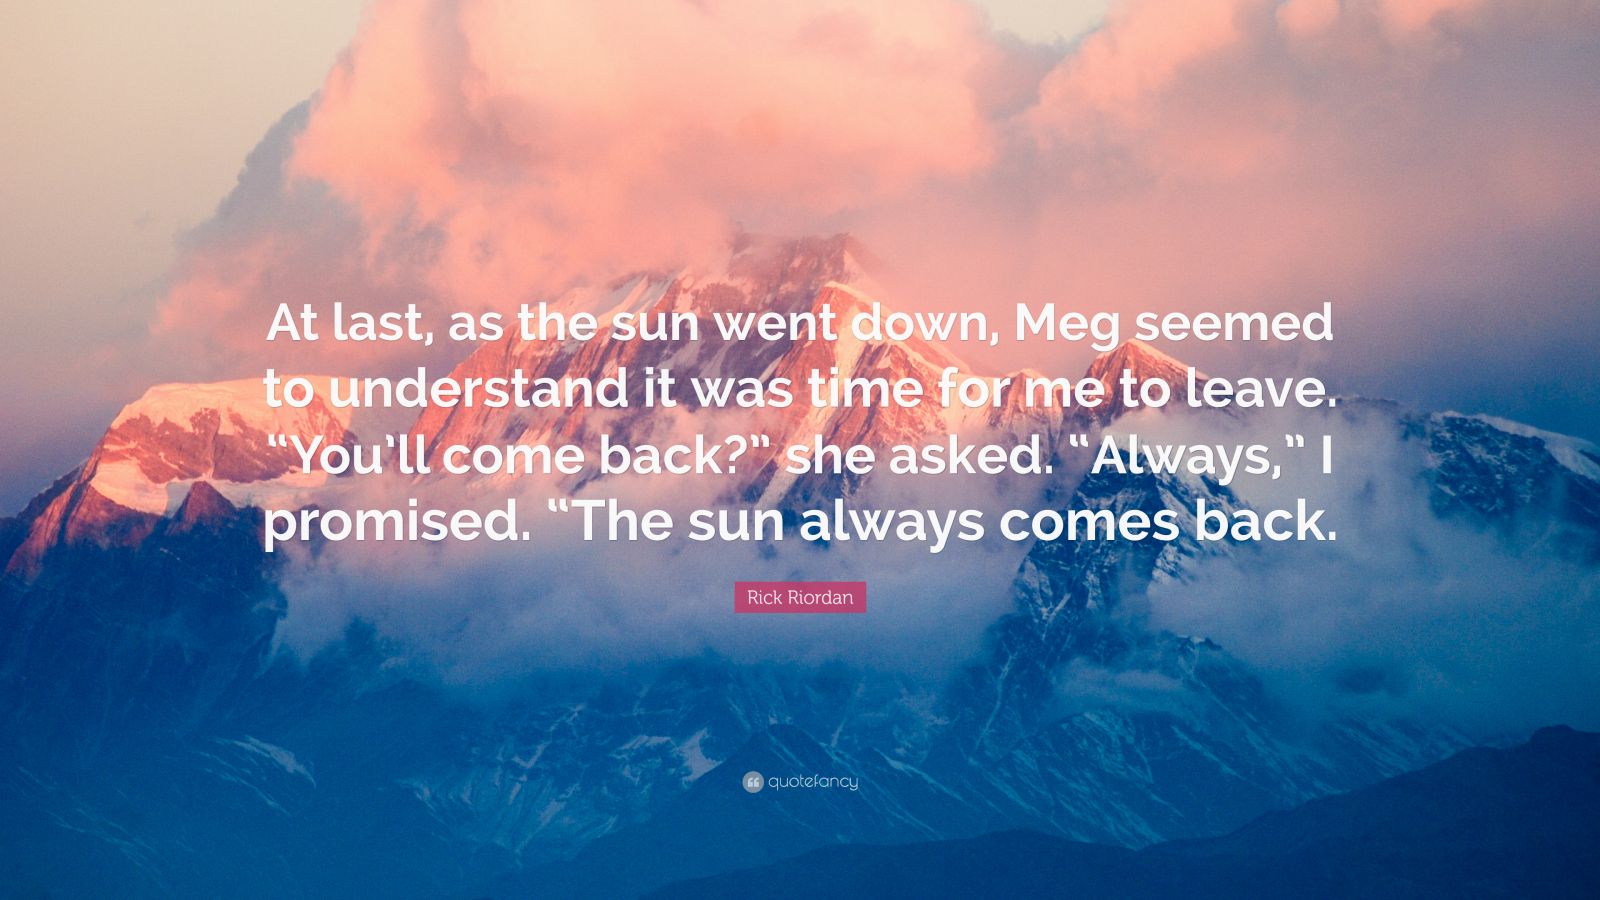 Rick Riordan Quote “at Last As The Sun Went Down Meg Seemed To Understand It Was Time For Me